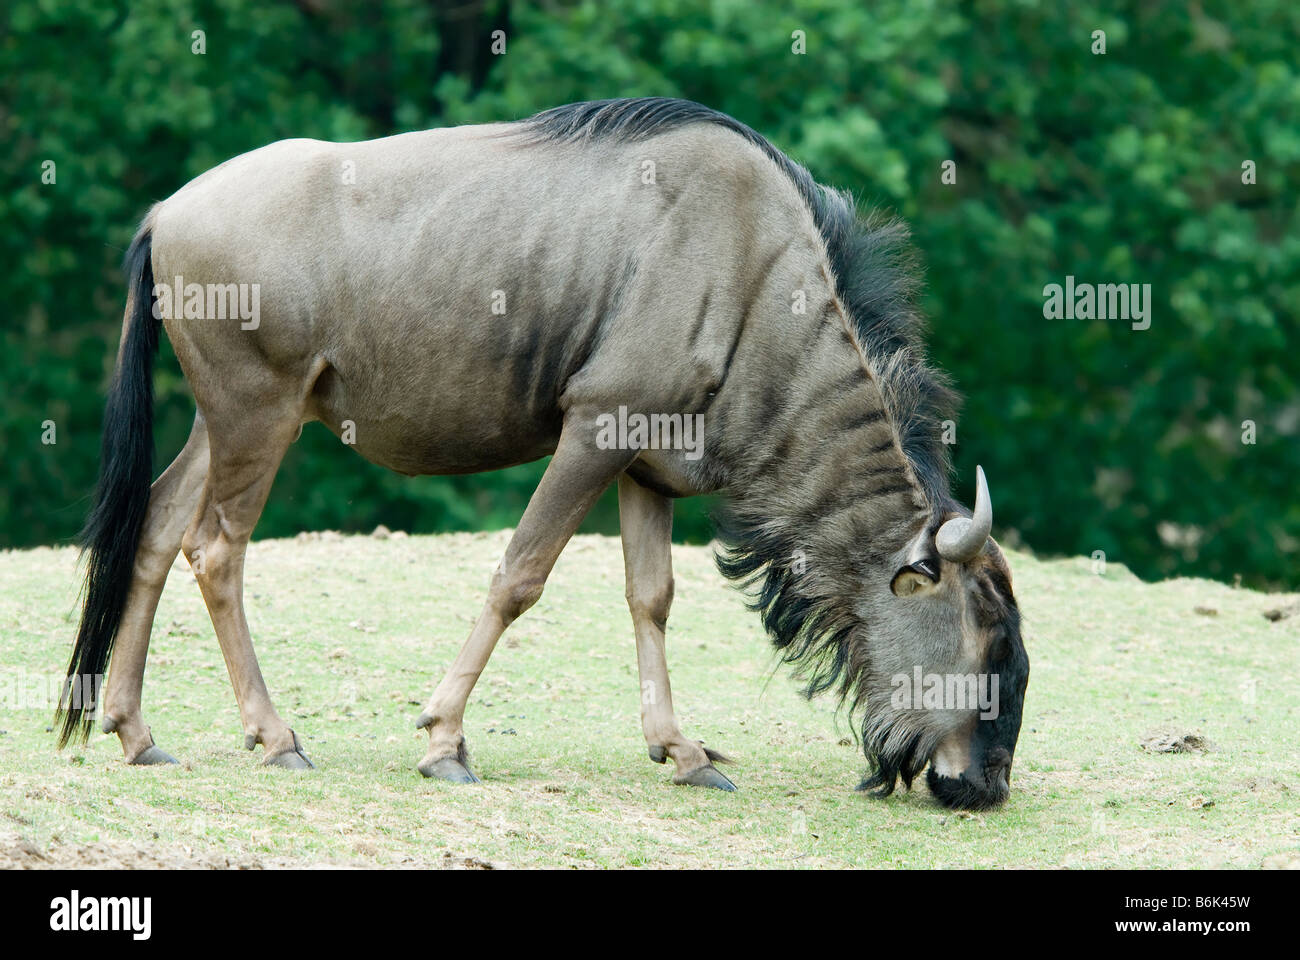 close up of a Blue wildebeest Connochaetes taurinus grazing Stock Photo